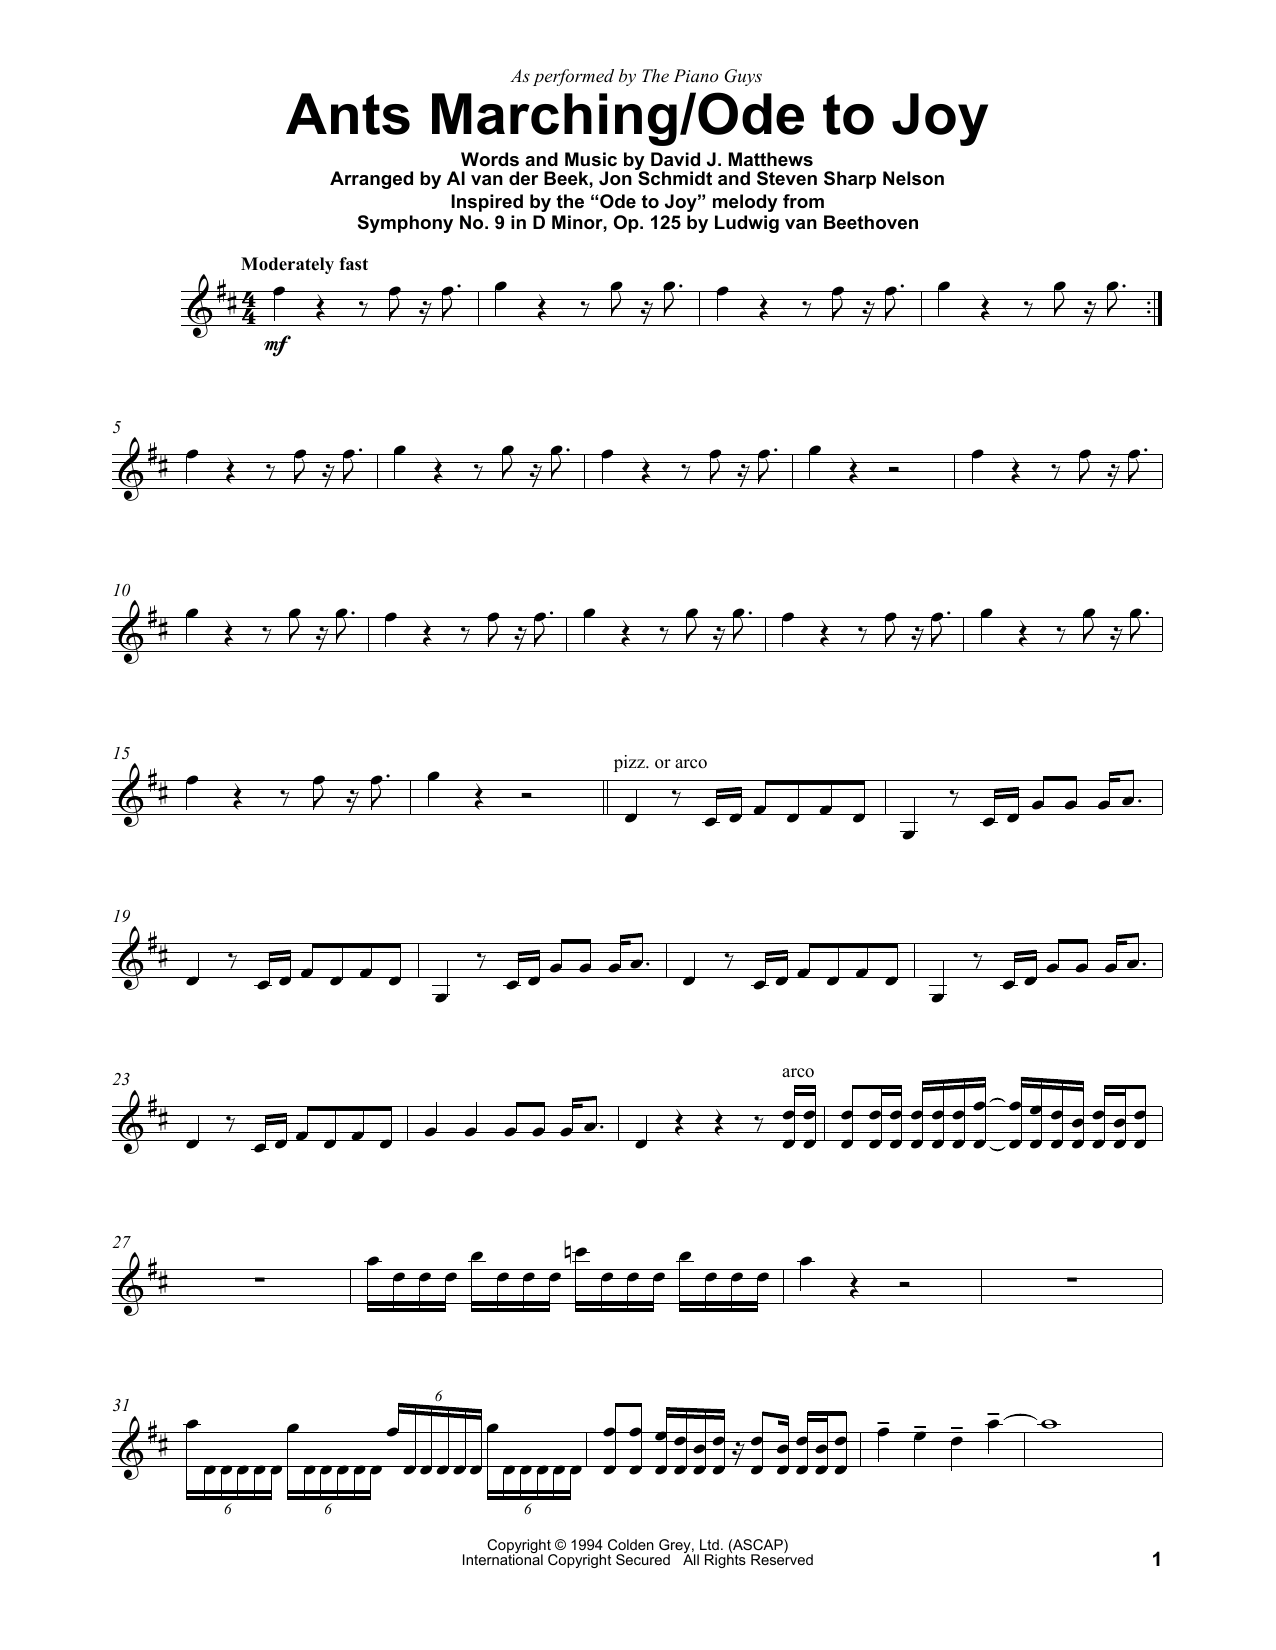 Download The Piano Guys Ants Marching/Ode To Joy Sheet Music